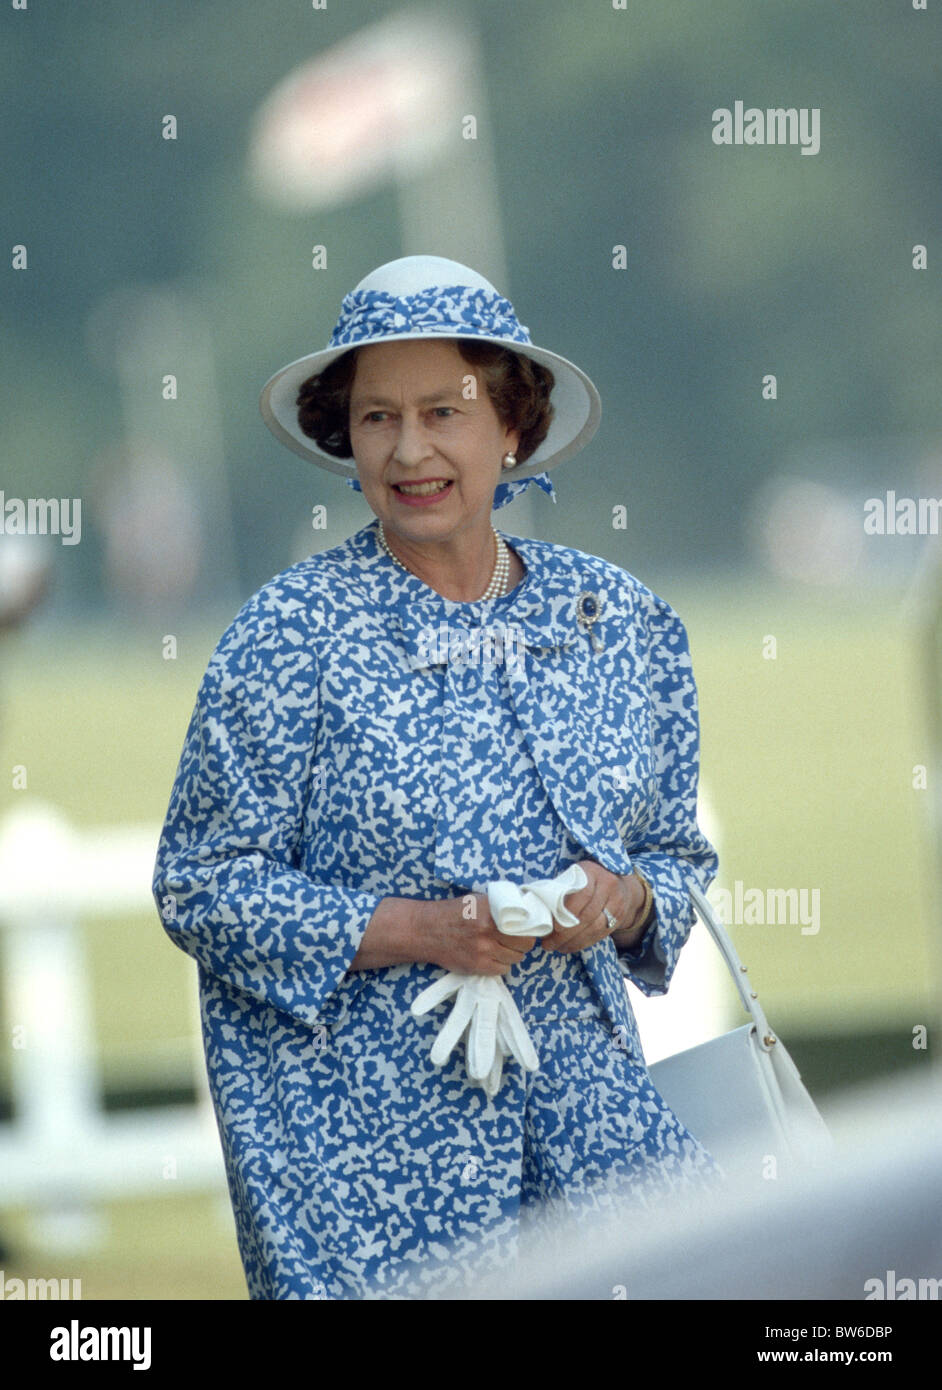 Her Majesty The Queen leaves the Royal box after watching Prince Charles play polo at Guards polo club at Smith's Lawn, Windsor. Stock Photo